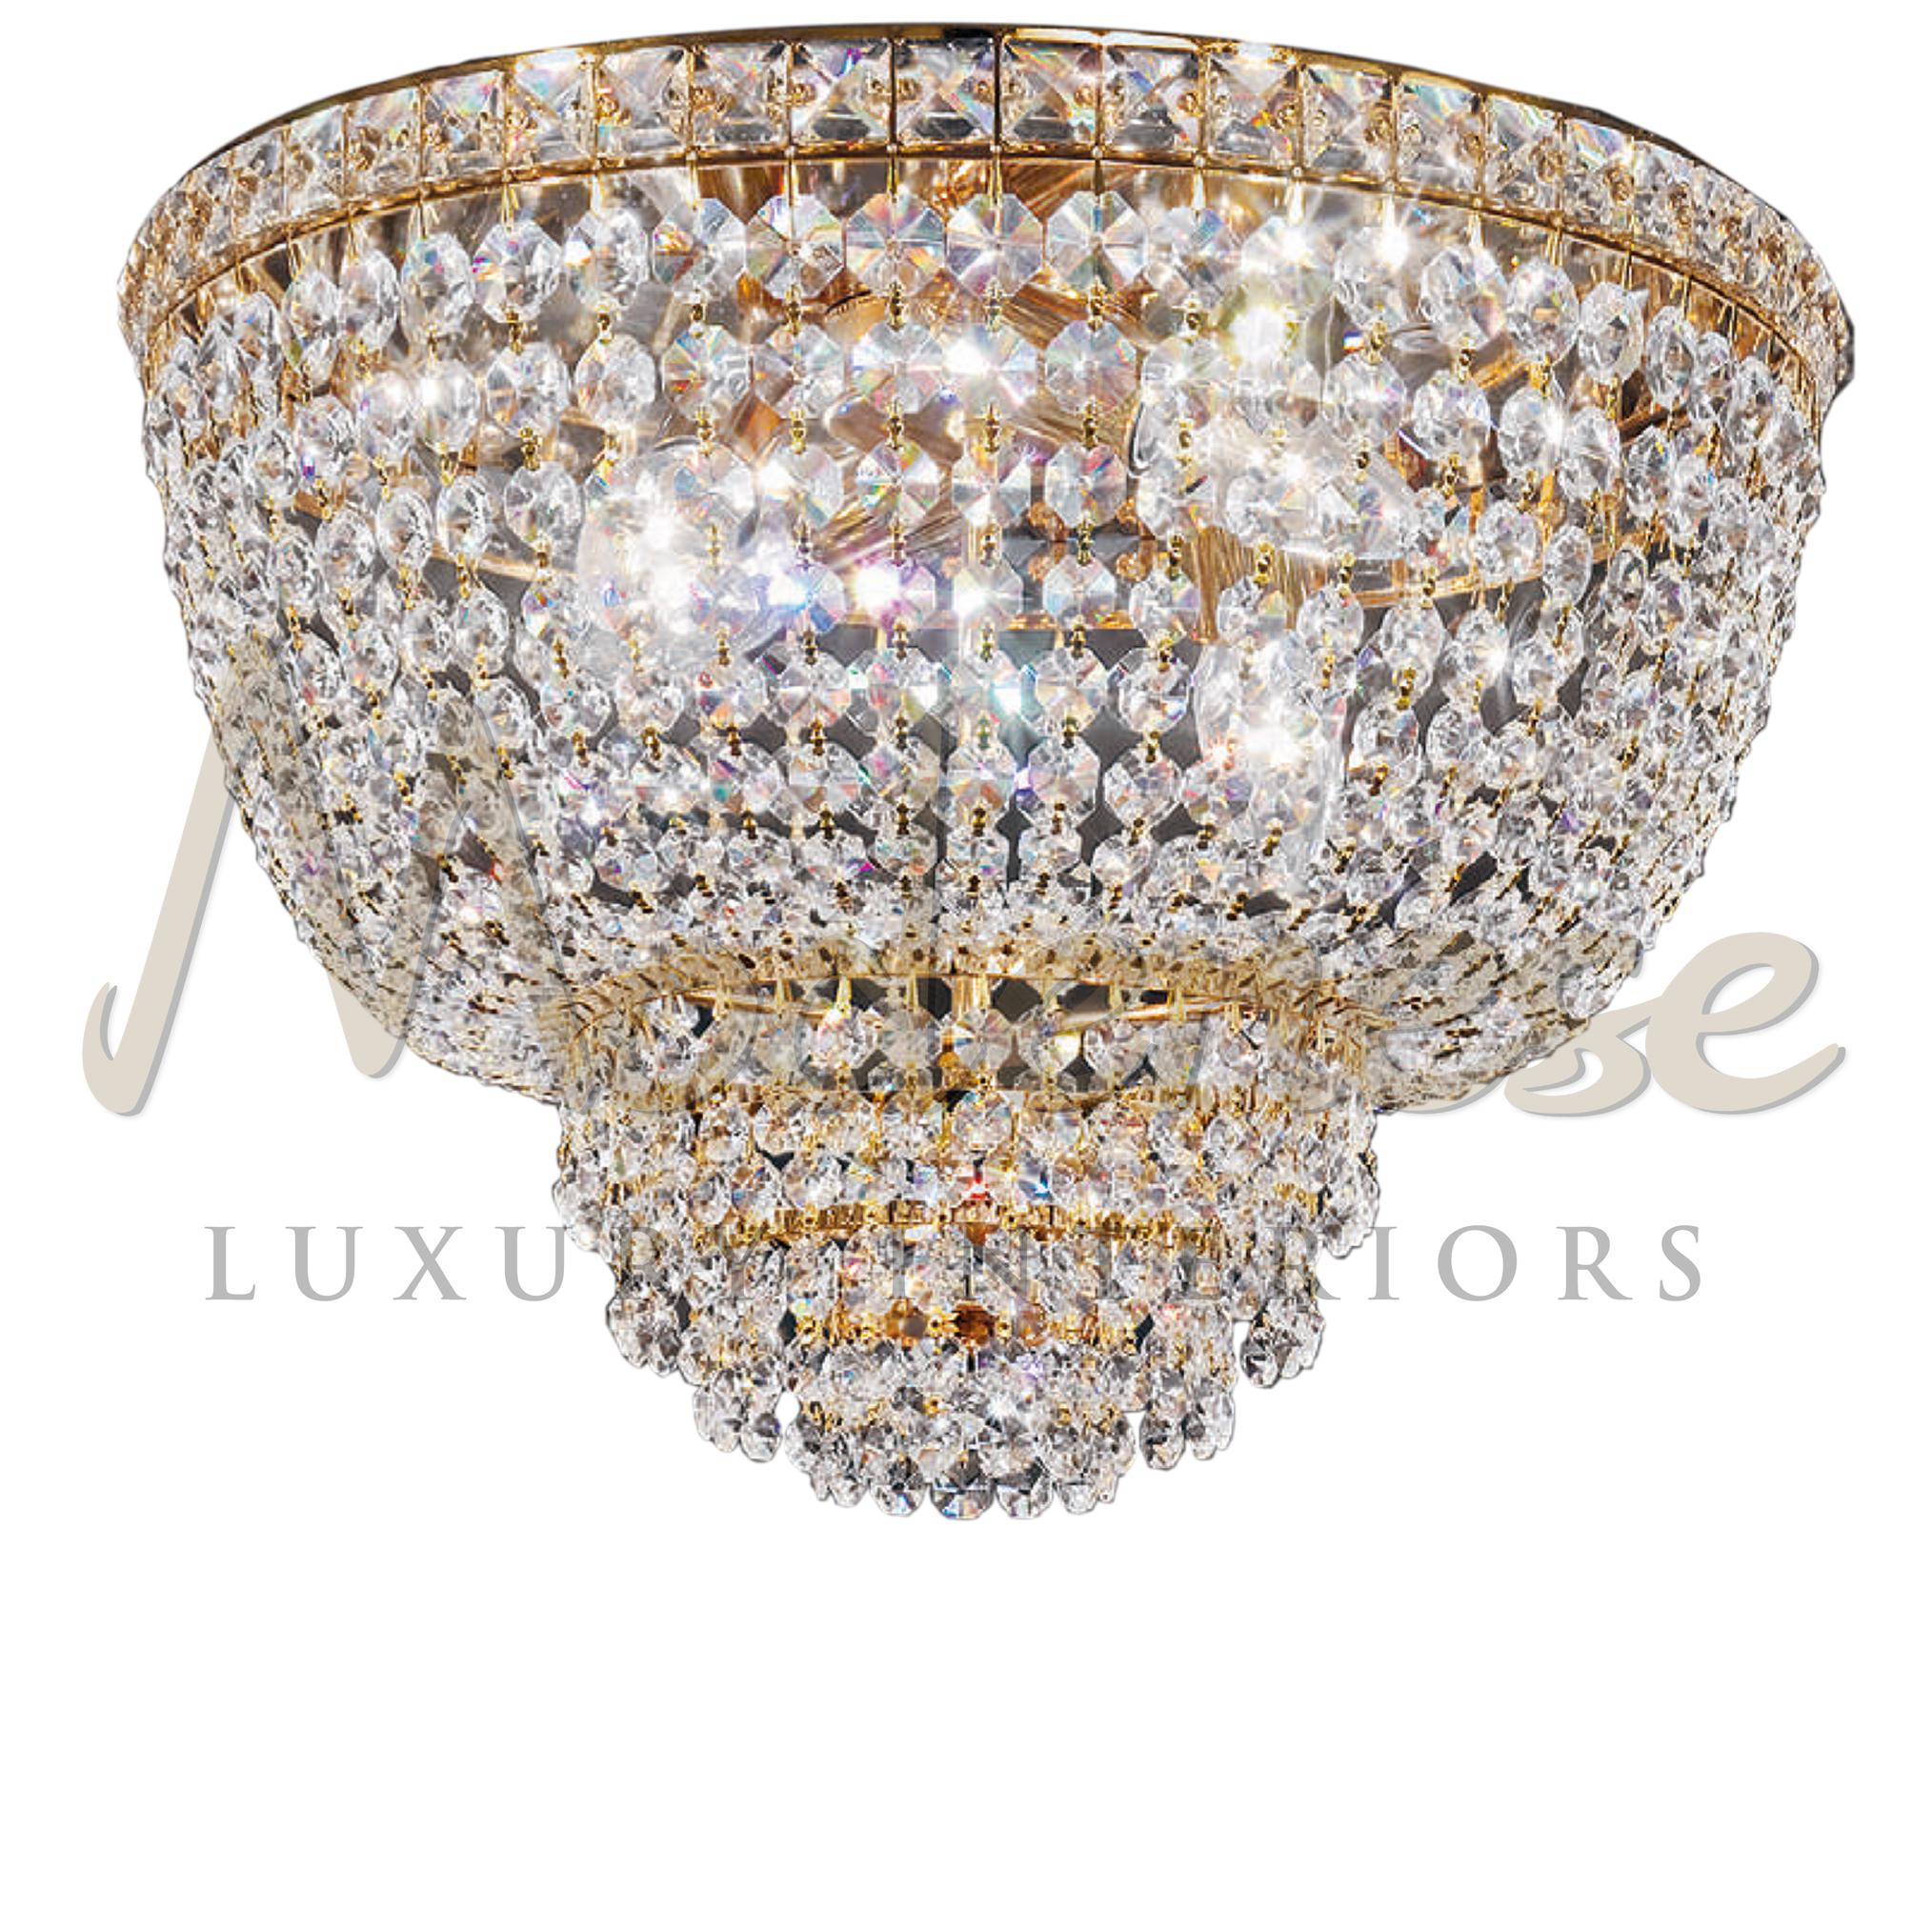 As works of art in their own right this Modenese Gastone Luxury Interiors immediately adds elegance and luxury to any room thanks to its 24kt gold plated structure and crystals. This model requires 4 single E14 screw fit light bulbs (40Watt max).
 